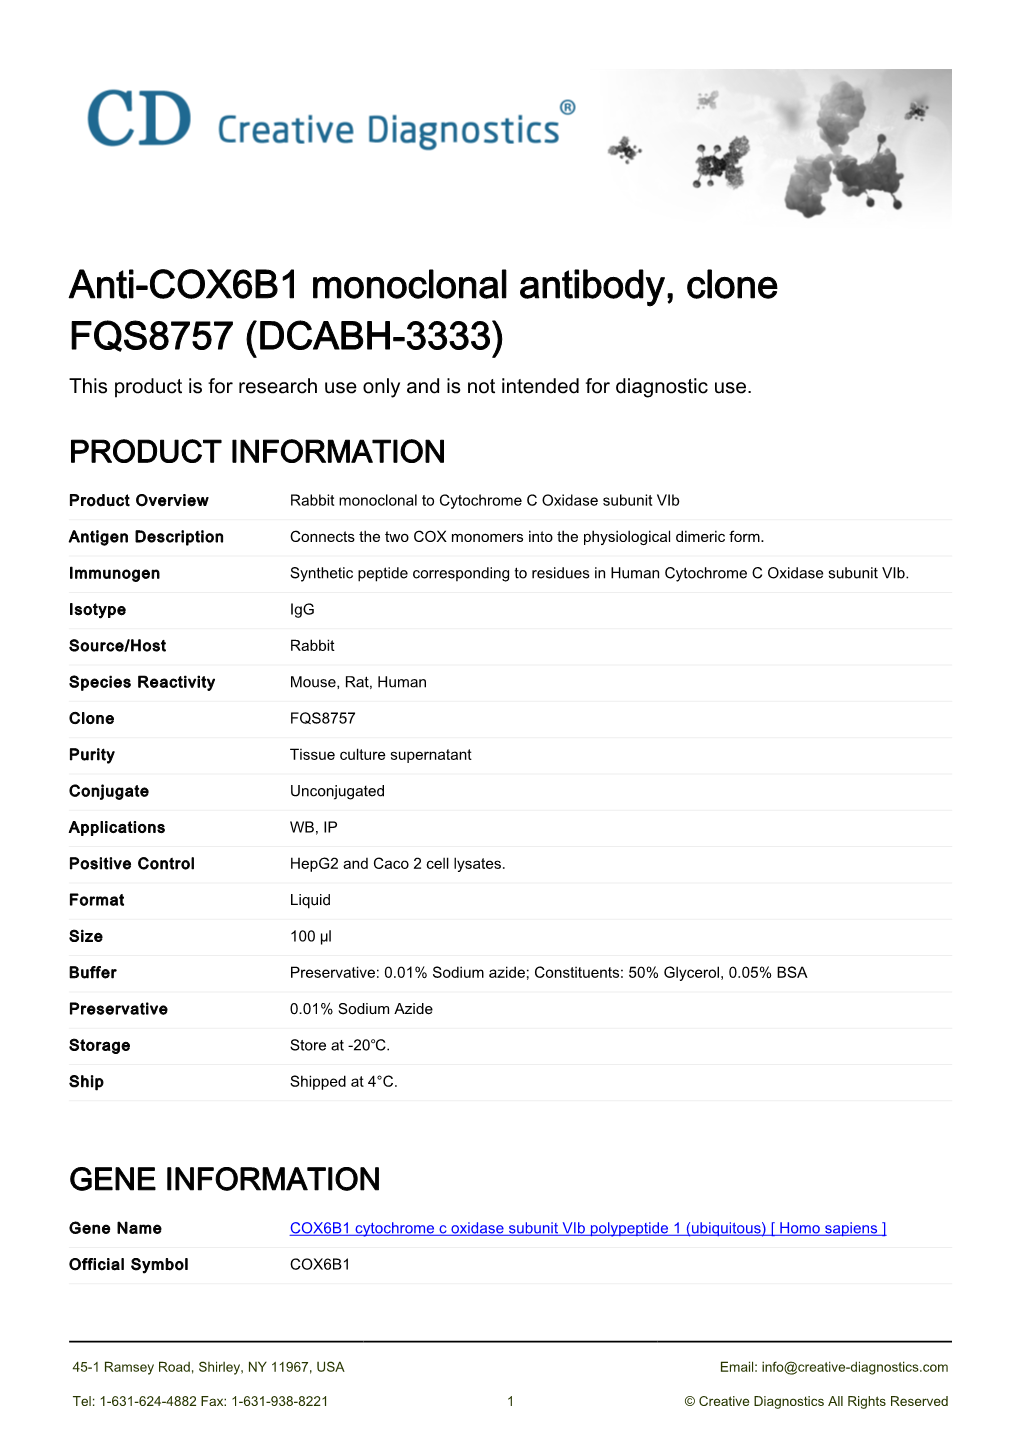 Anti-COX6B1 Monoclonal Antibody, Clone FQS8757 (DCABH-3333) This Product Is for Research Use Only and Is Not Intended for Diagnostic Use